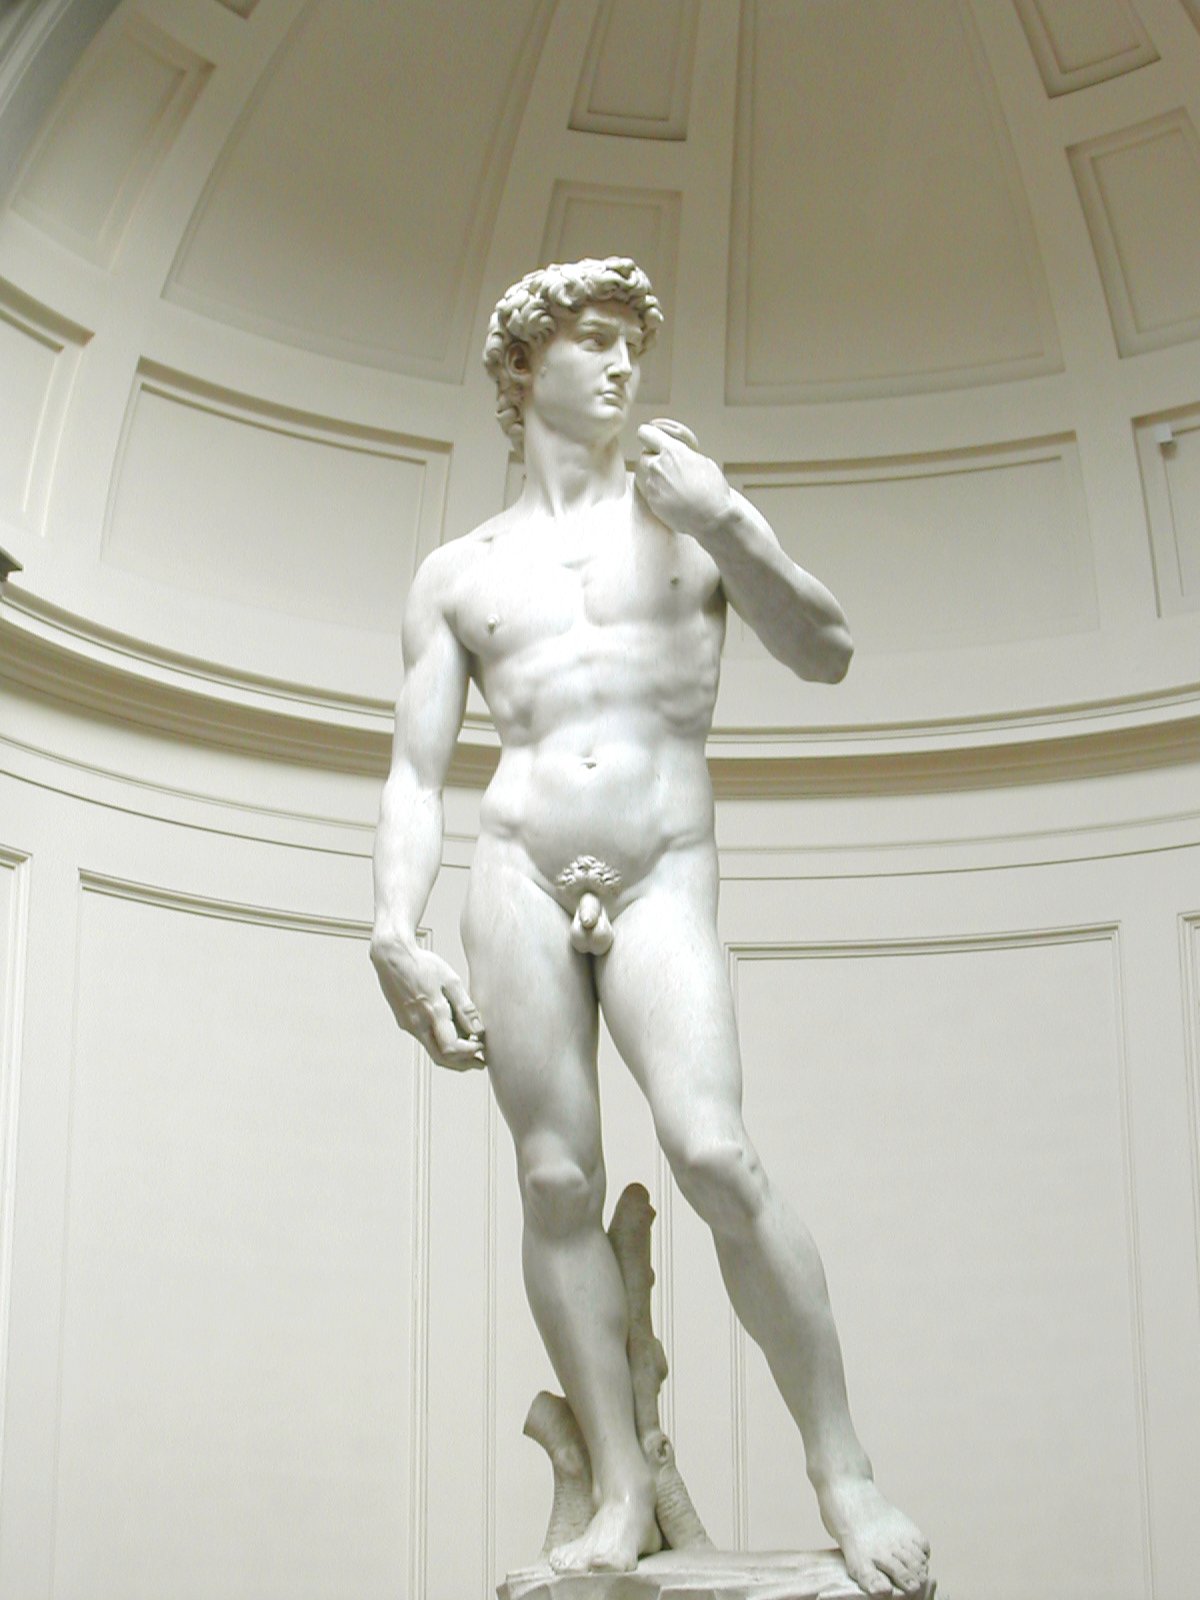 Michelangelo S David Has Weak Ankles International Institute For Conservation Of Historic And Artistic Works,Small Space Parallel Modular Kitchen Designs